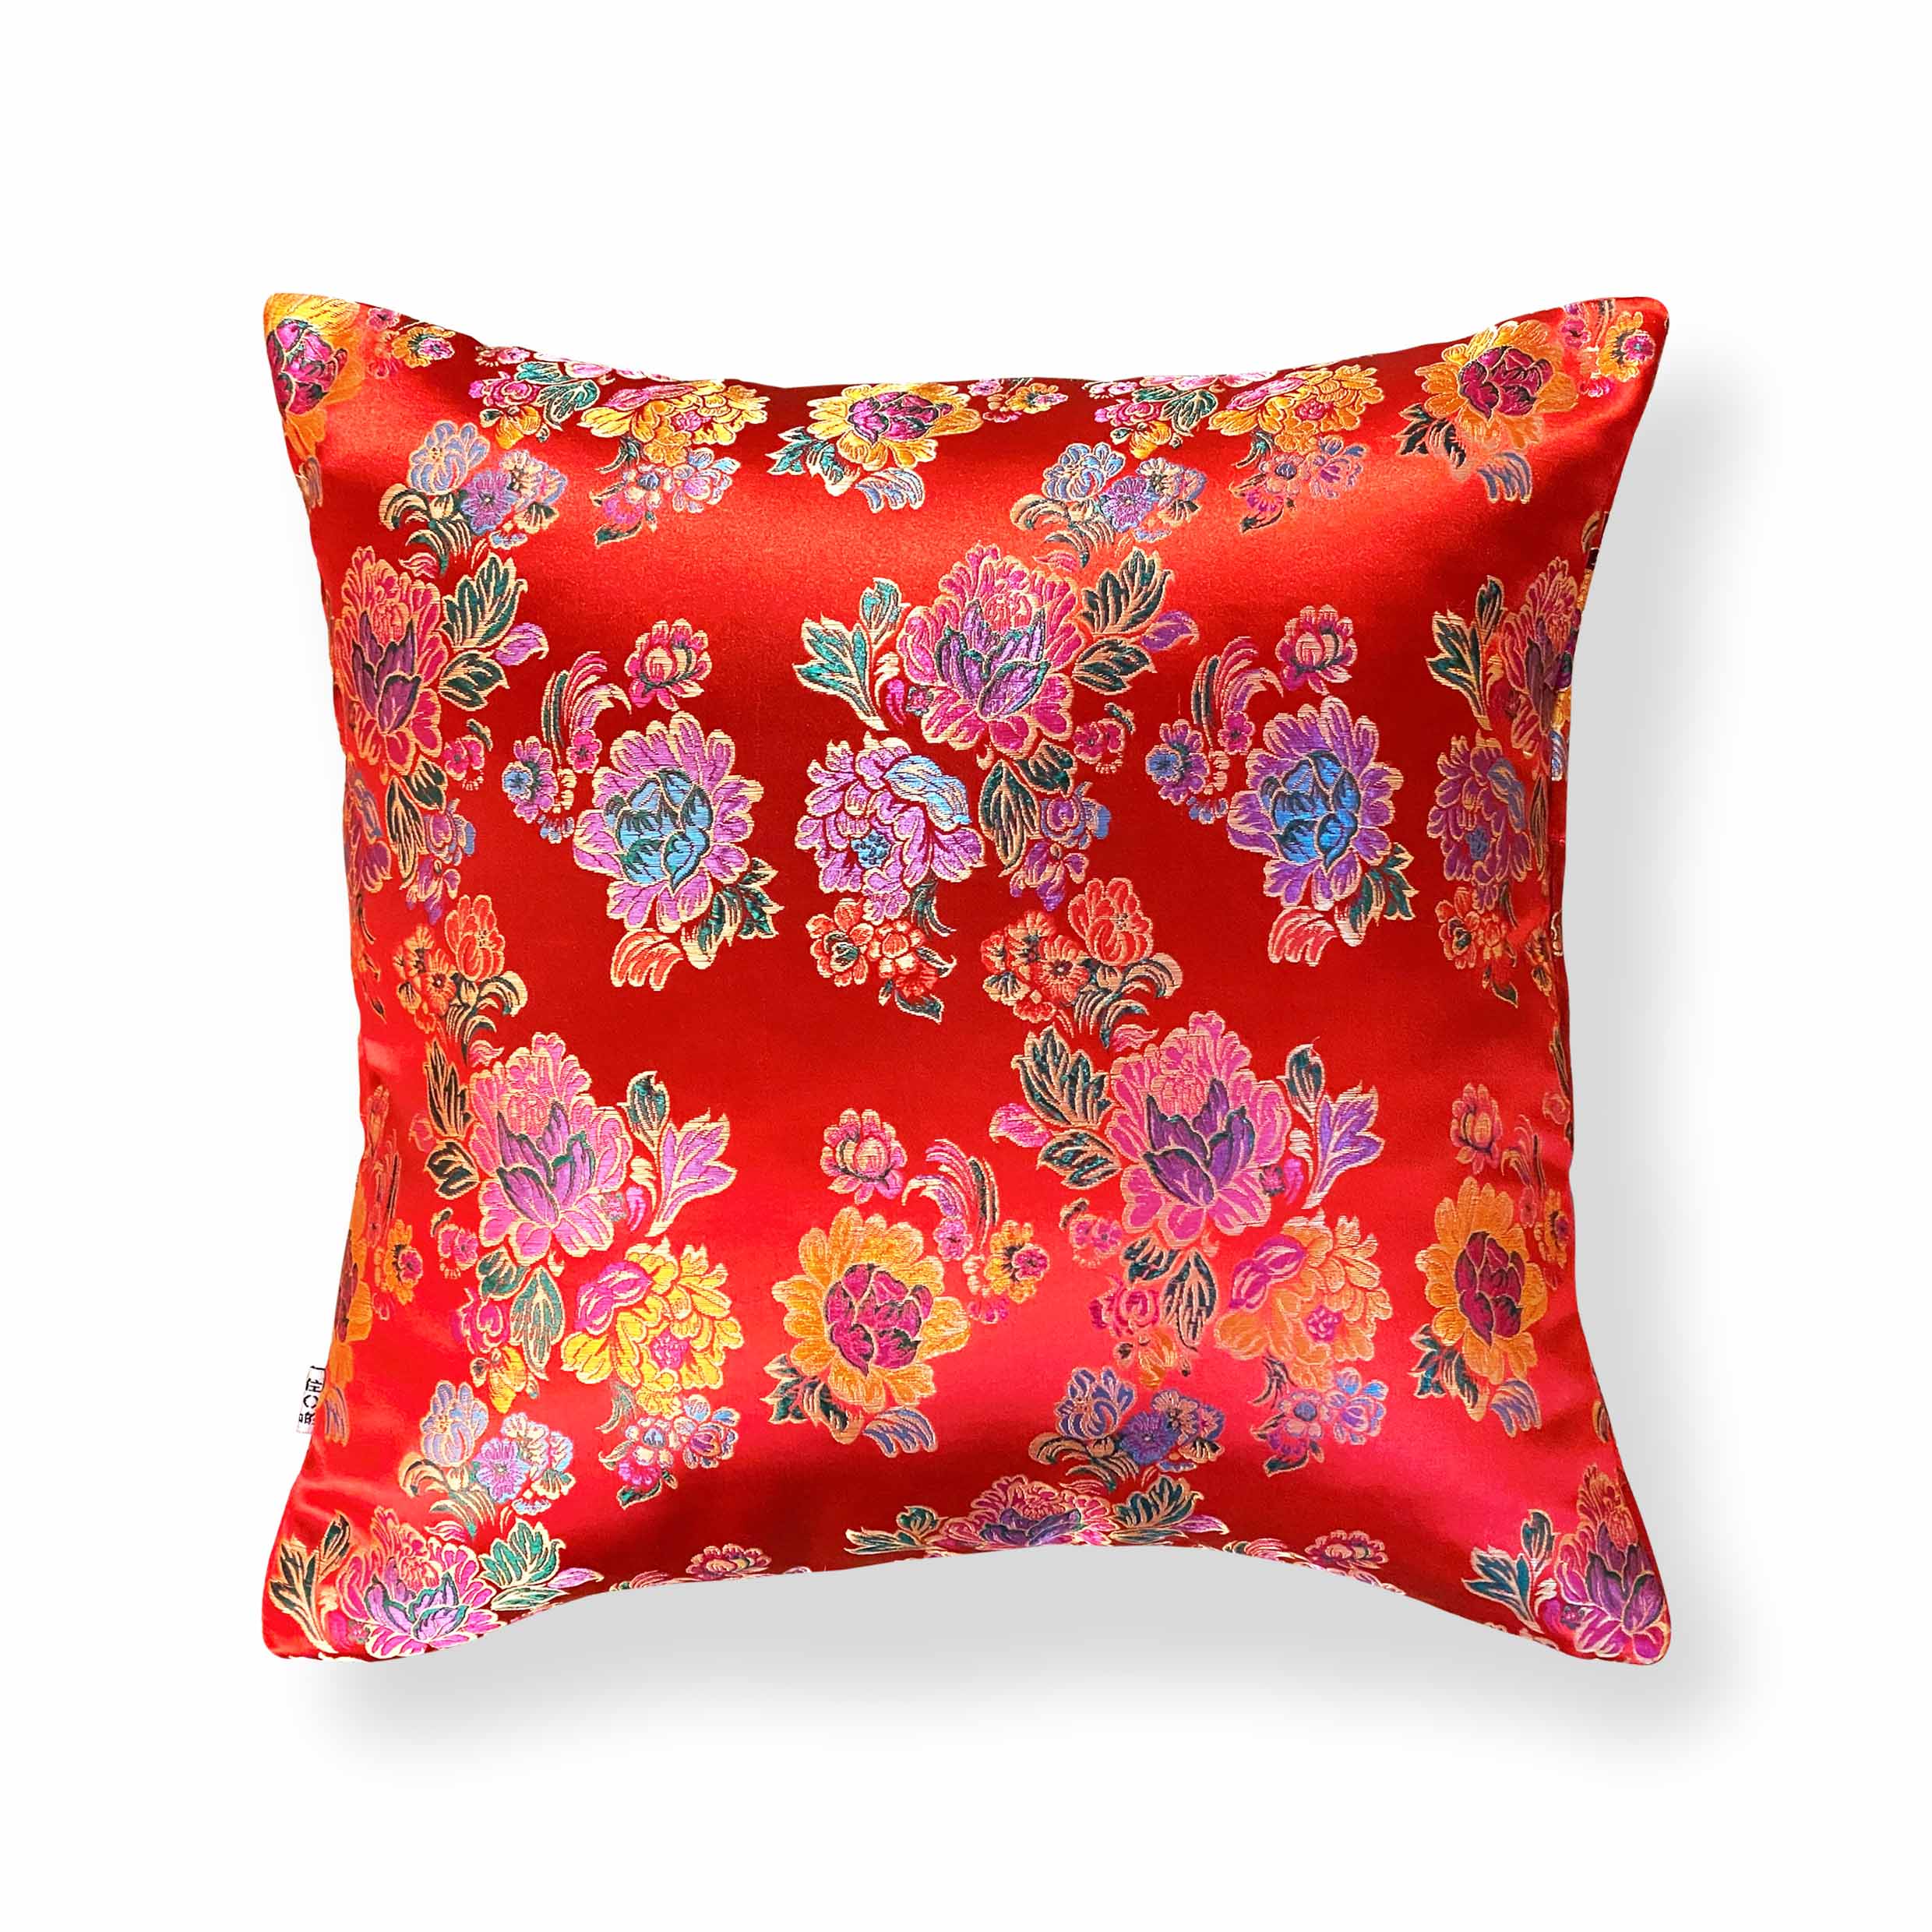 Embroidery Print Double-Sided Cushion Cover, 45 x 45 cm, Red